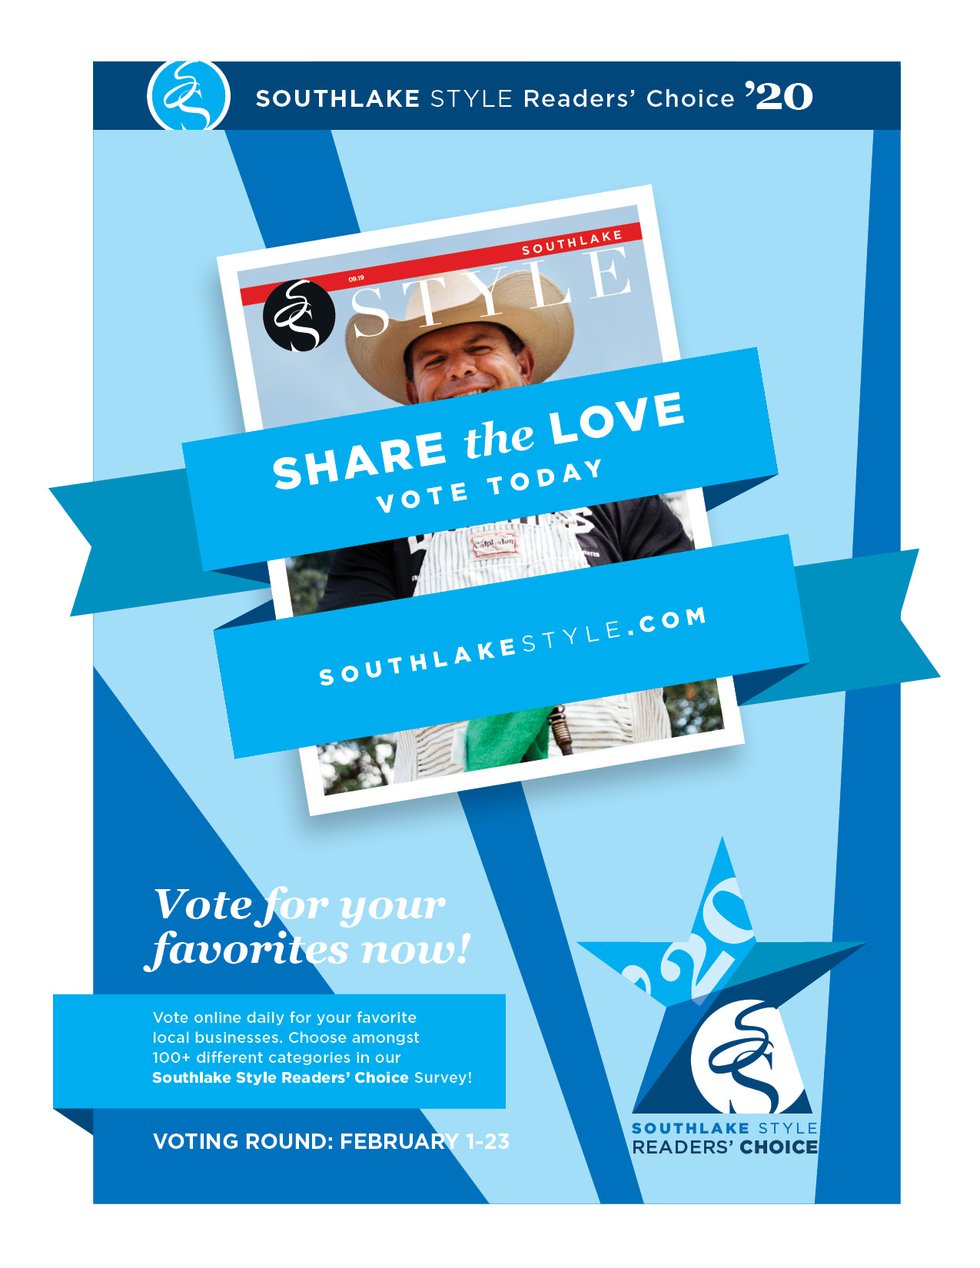 Readers' Choice Voting Round Poster